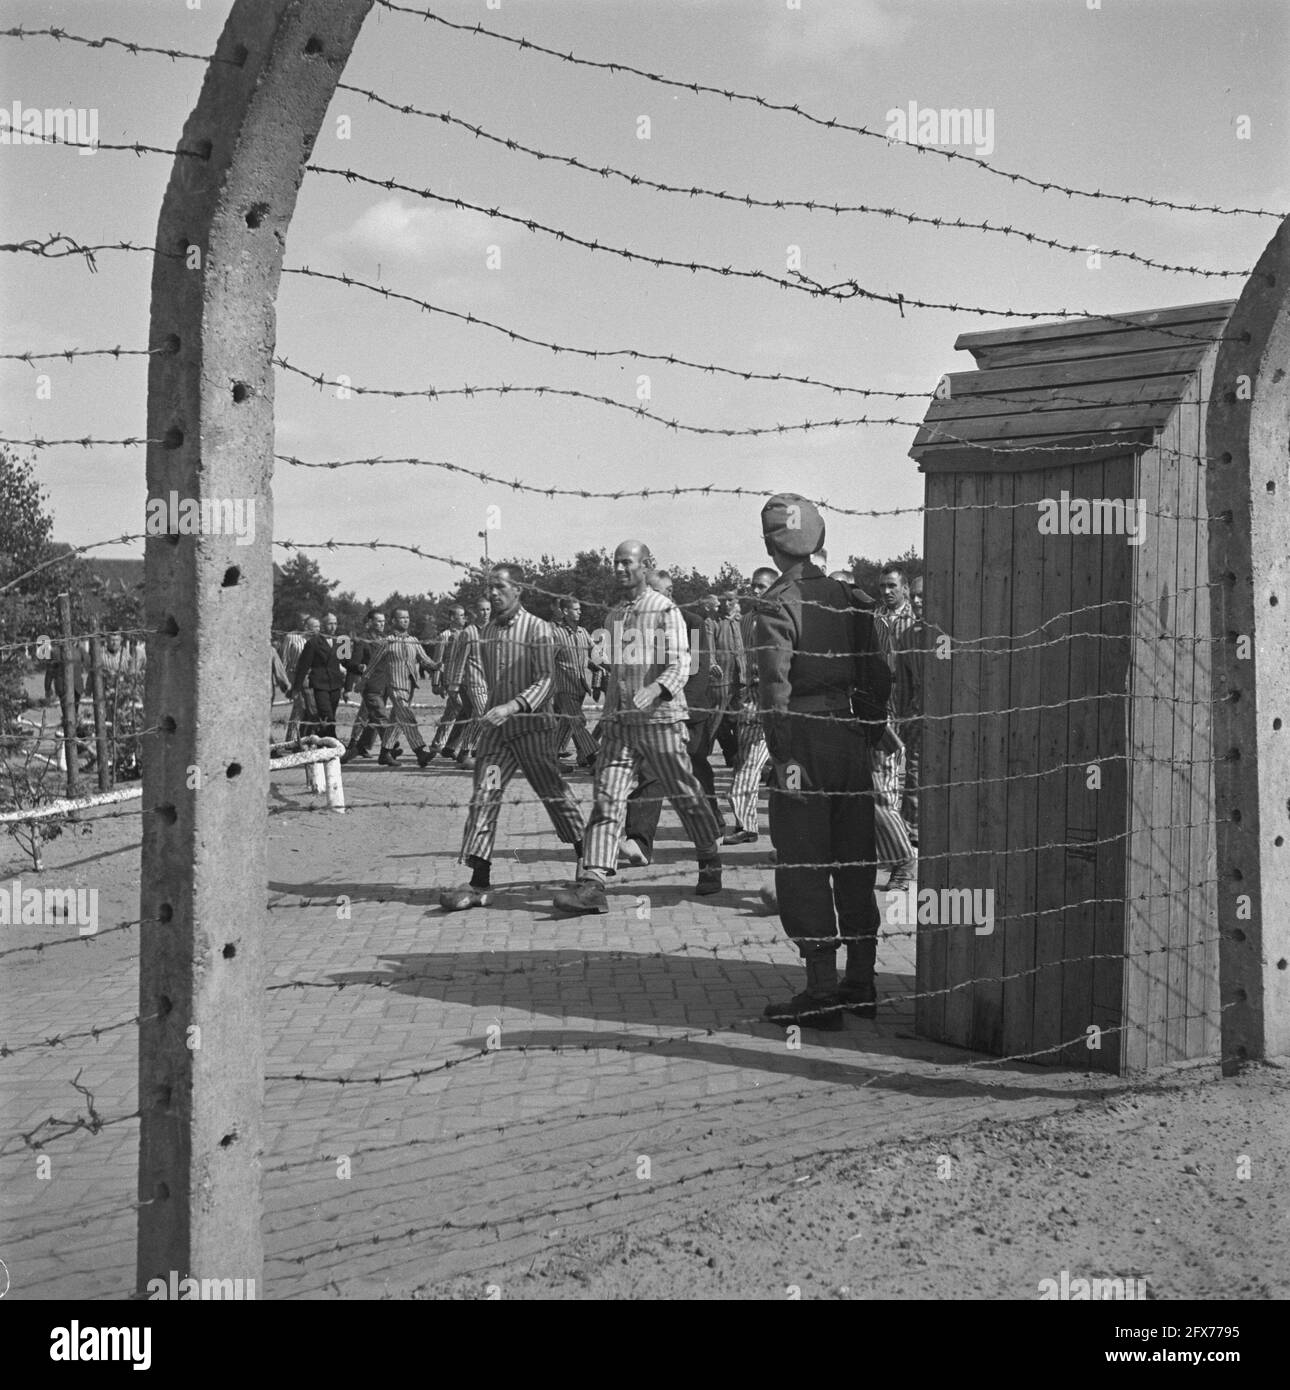 In the penal camp at Vught, 7000 Dutch collaborators and traitors are locked up. Soldiers of the Dutch Stoottroepen are in charge of the security, especially of the 300 Dutch SS men. Led by the camp commander, Major L. Mennes, and his aides, these prisoners are used to clear the area around Vught of land mines, among other things. They were dressed in the blue and white striped prisoner's uniforms of the former Dutchmen captured by the Germans. The prisoners receive the minimum civilian ration, which is also reduced because all delicacies have been taken off. While waiting for their final Stock Photo